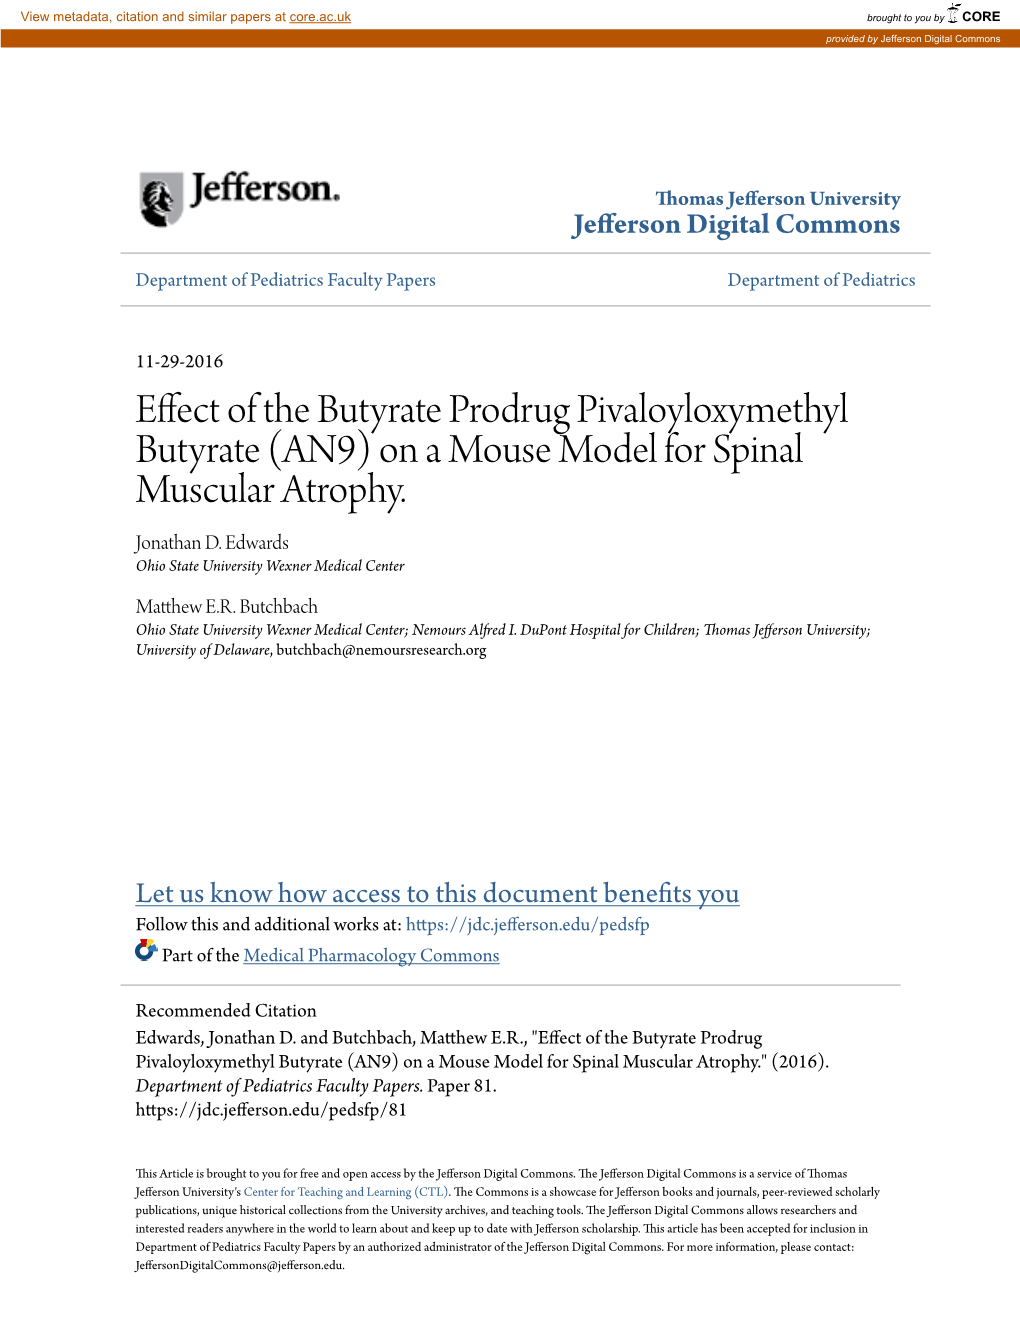 Effect of the Butyrate Prodrug Pivaloyloxymethyl Butyrate (AN9) on a Mouse Model for Spinal Muscular Atrophy. Jonathan D